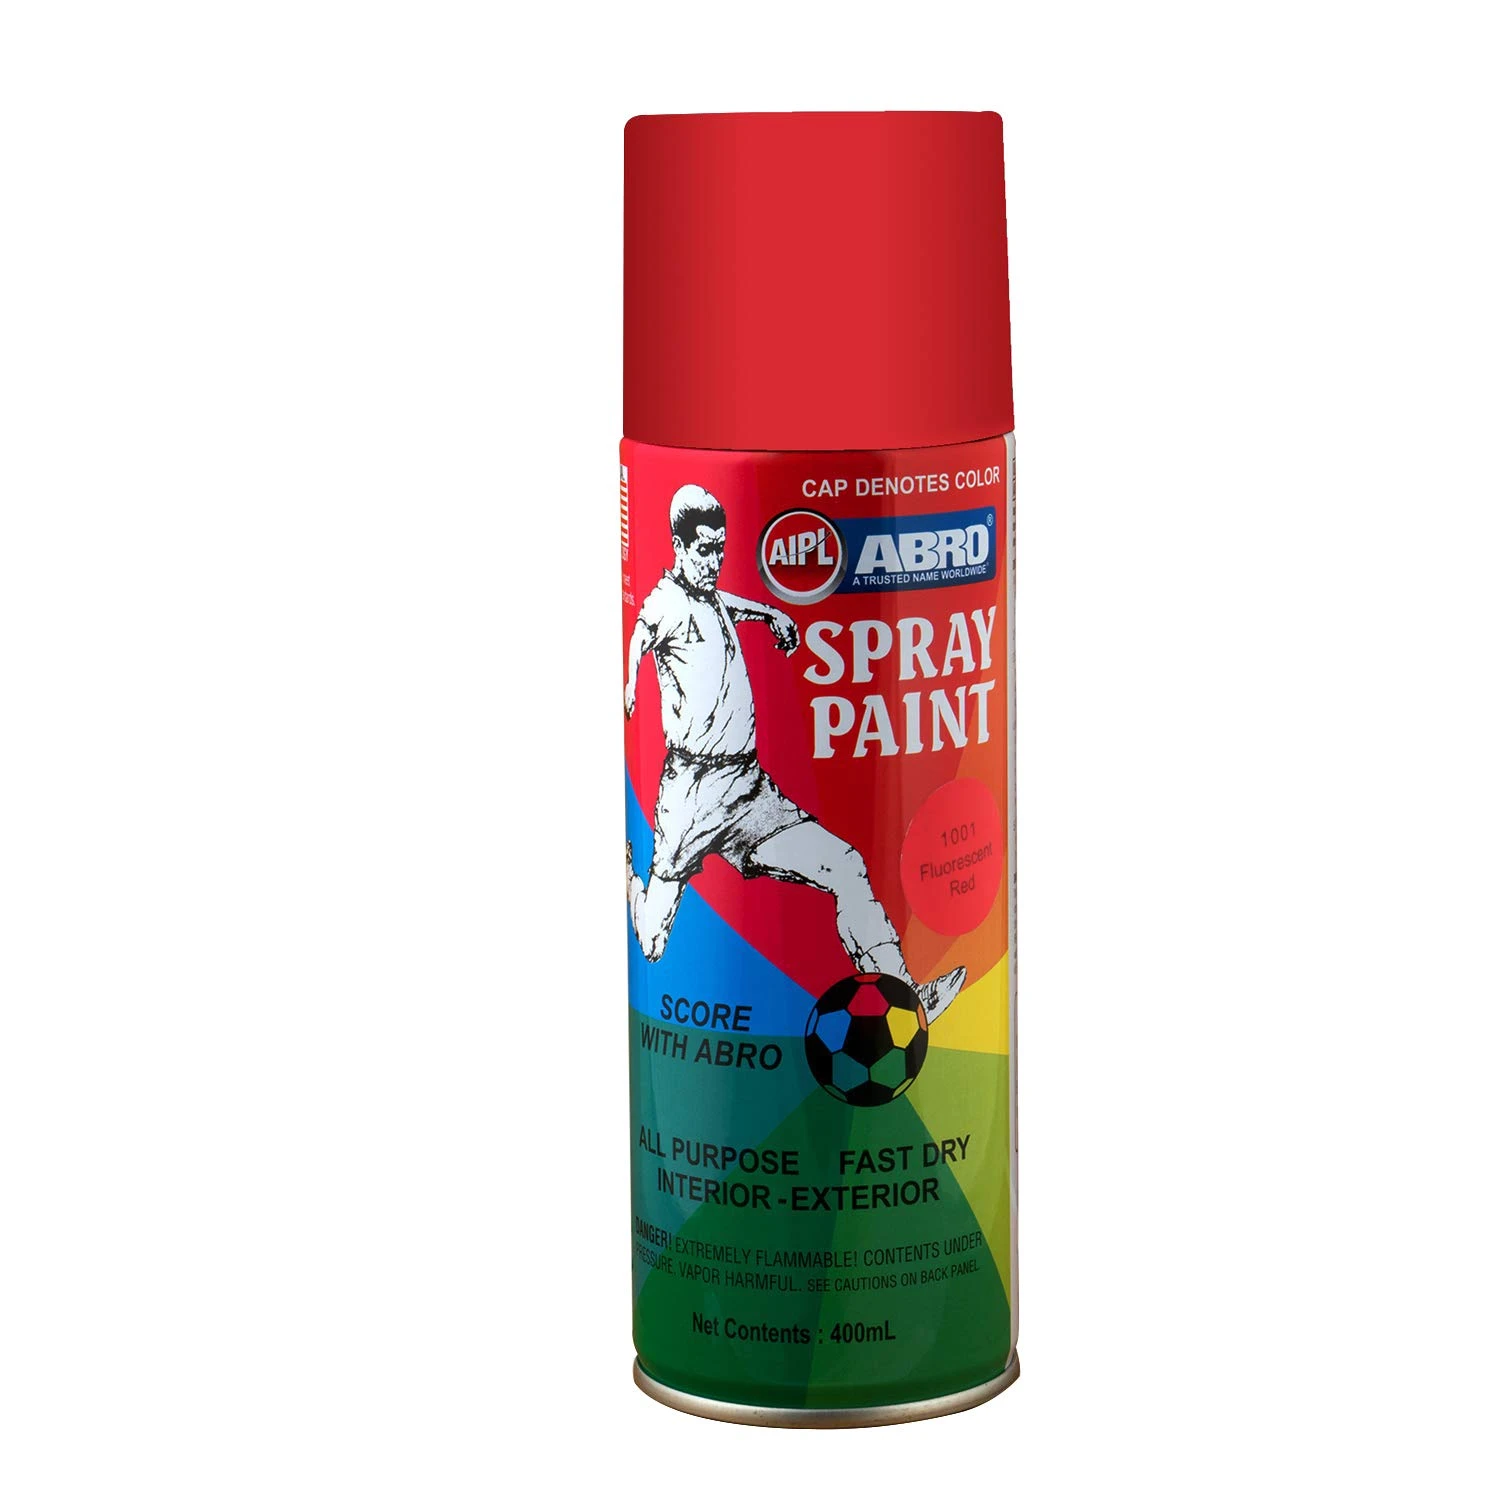 Car Spray Paint (Fluorescent Red) 400ml: ABRO SP01 -compatibility,  features, prices. boodmo